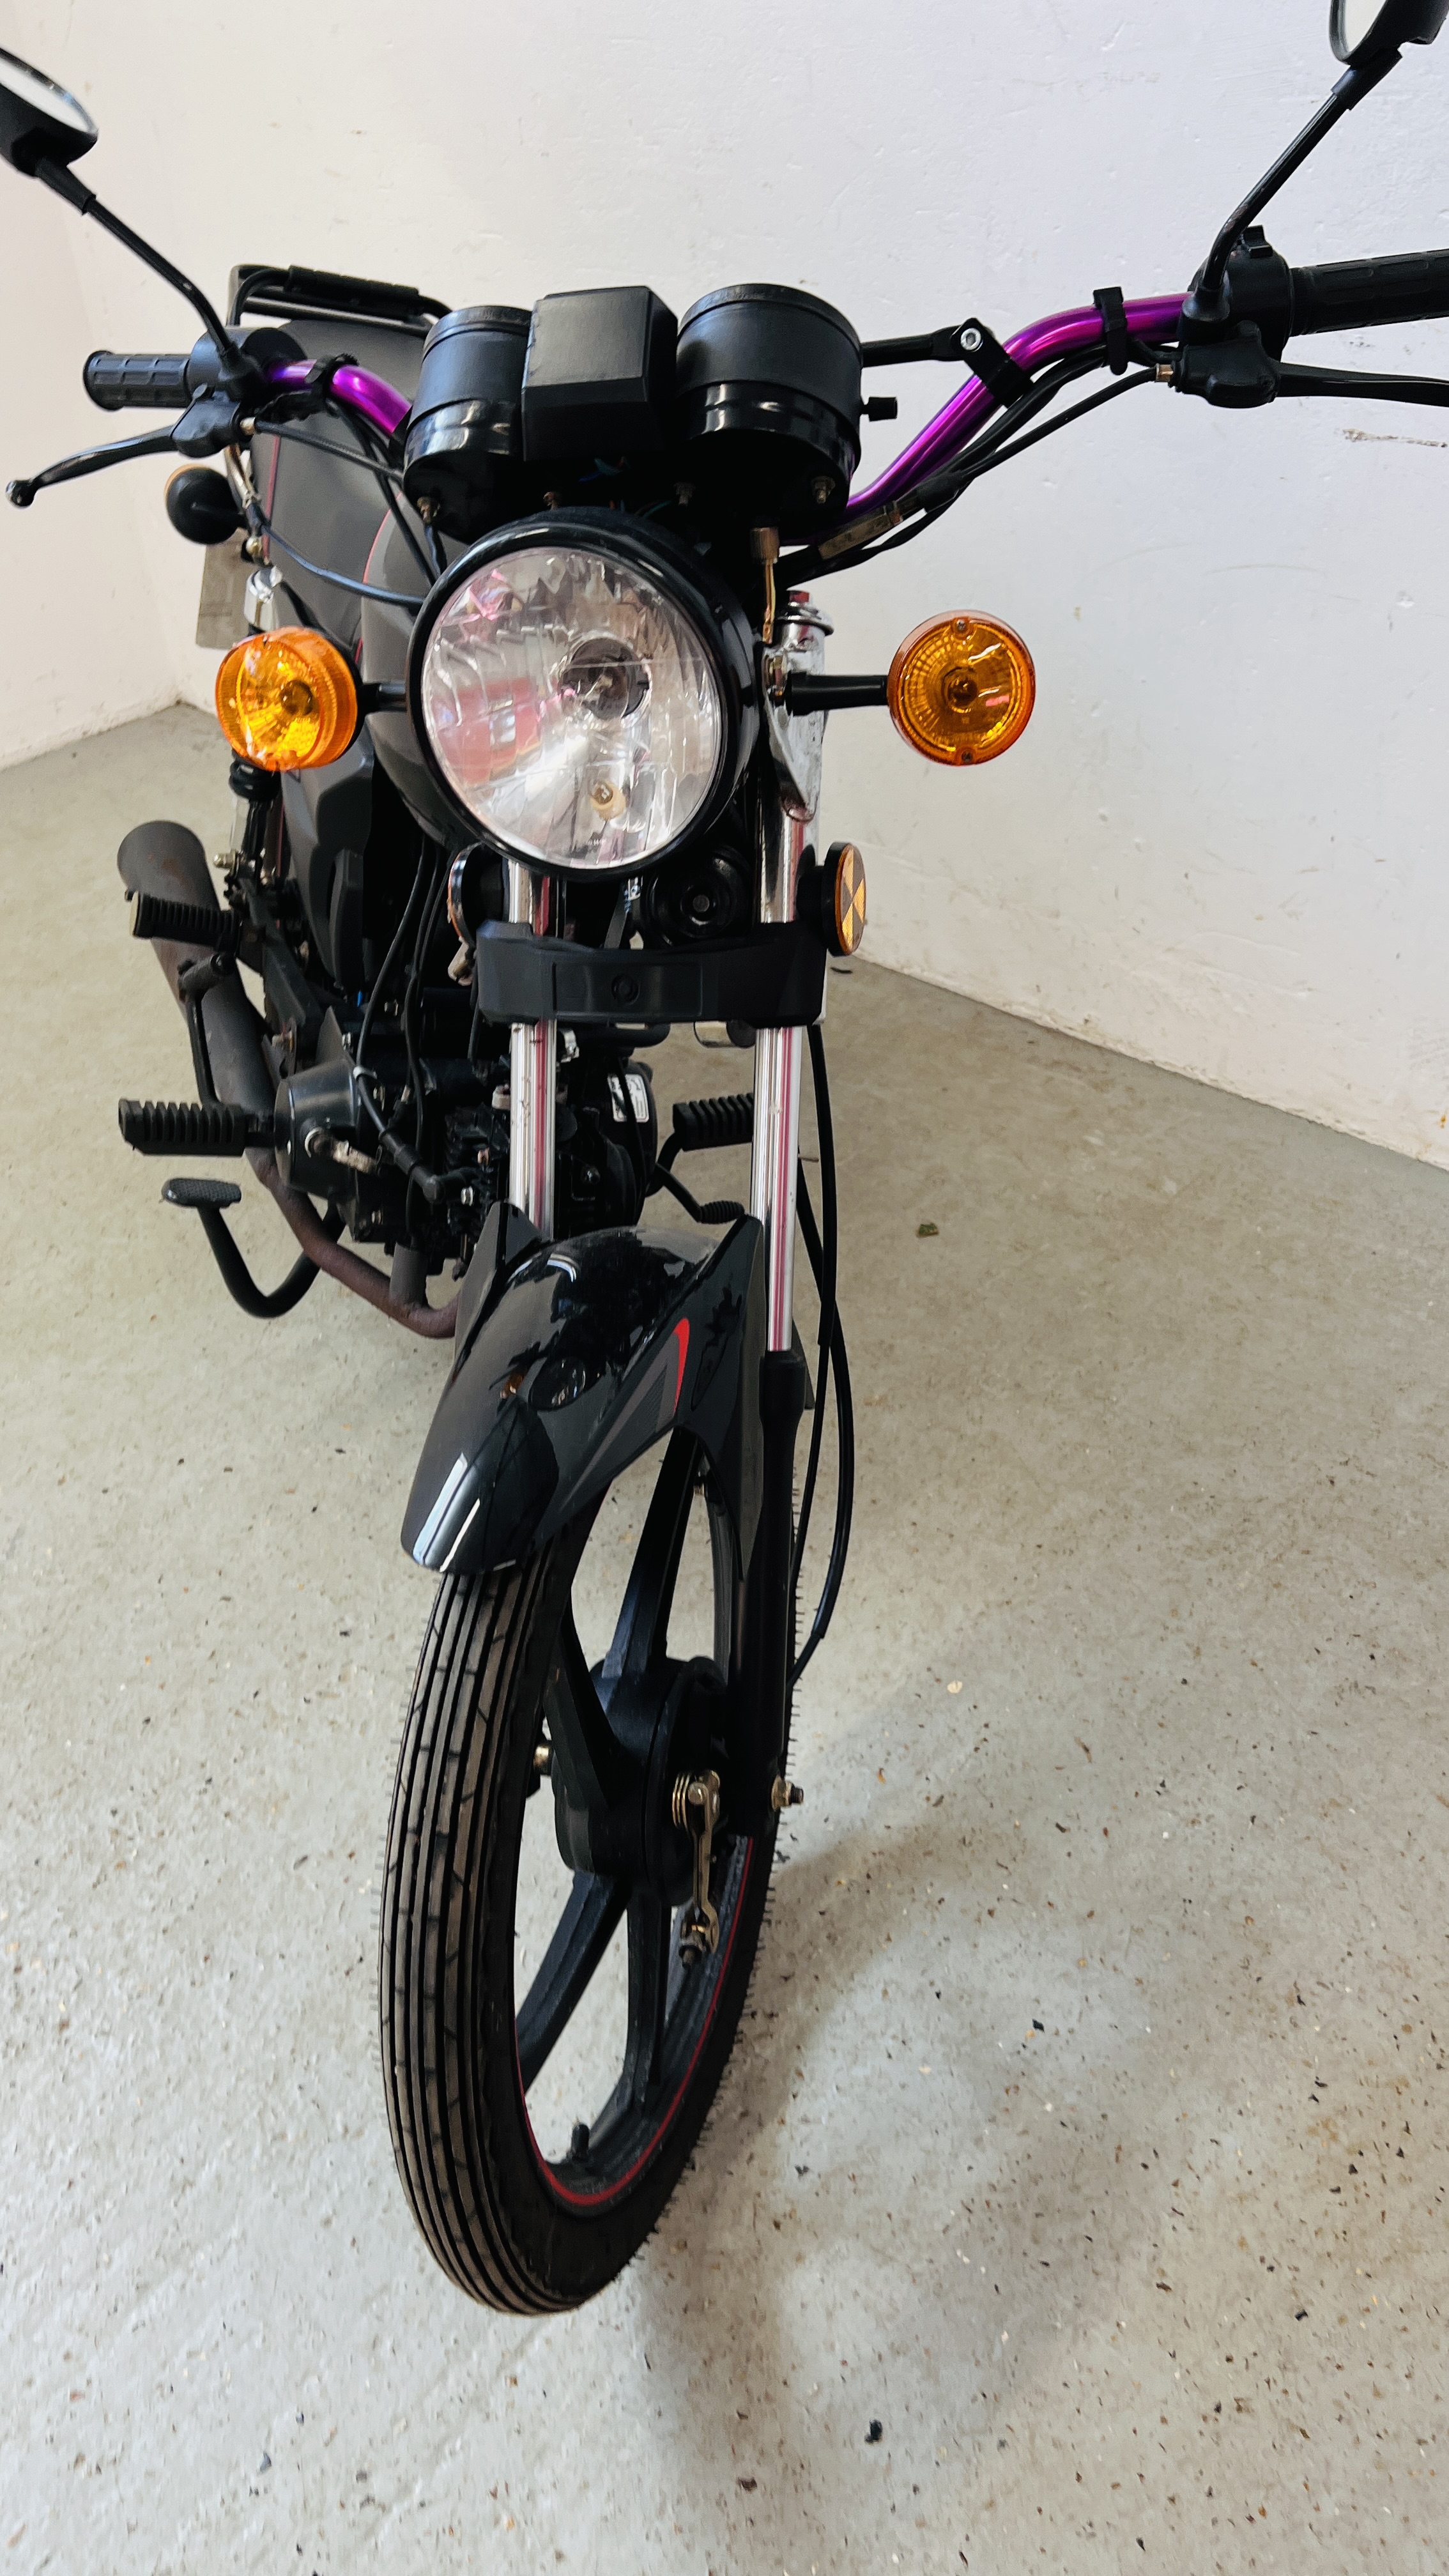 CHAMP 48CC MOTOR CYCLE. VRM - KX69 CHD. FIRST REGISTERED: 01/10/2019. MOT EXPIRED: 30/09/2022. - Image 15 of 22